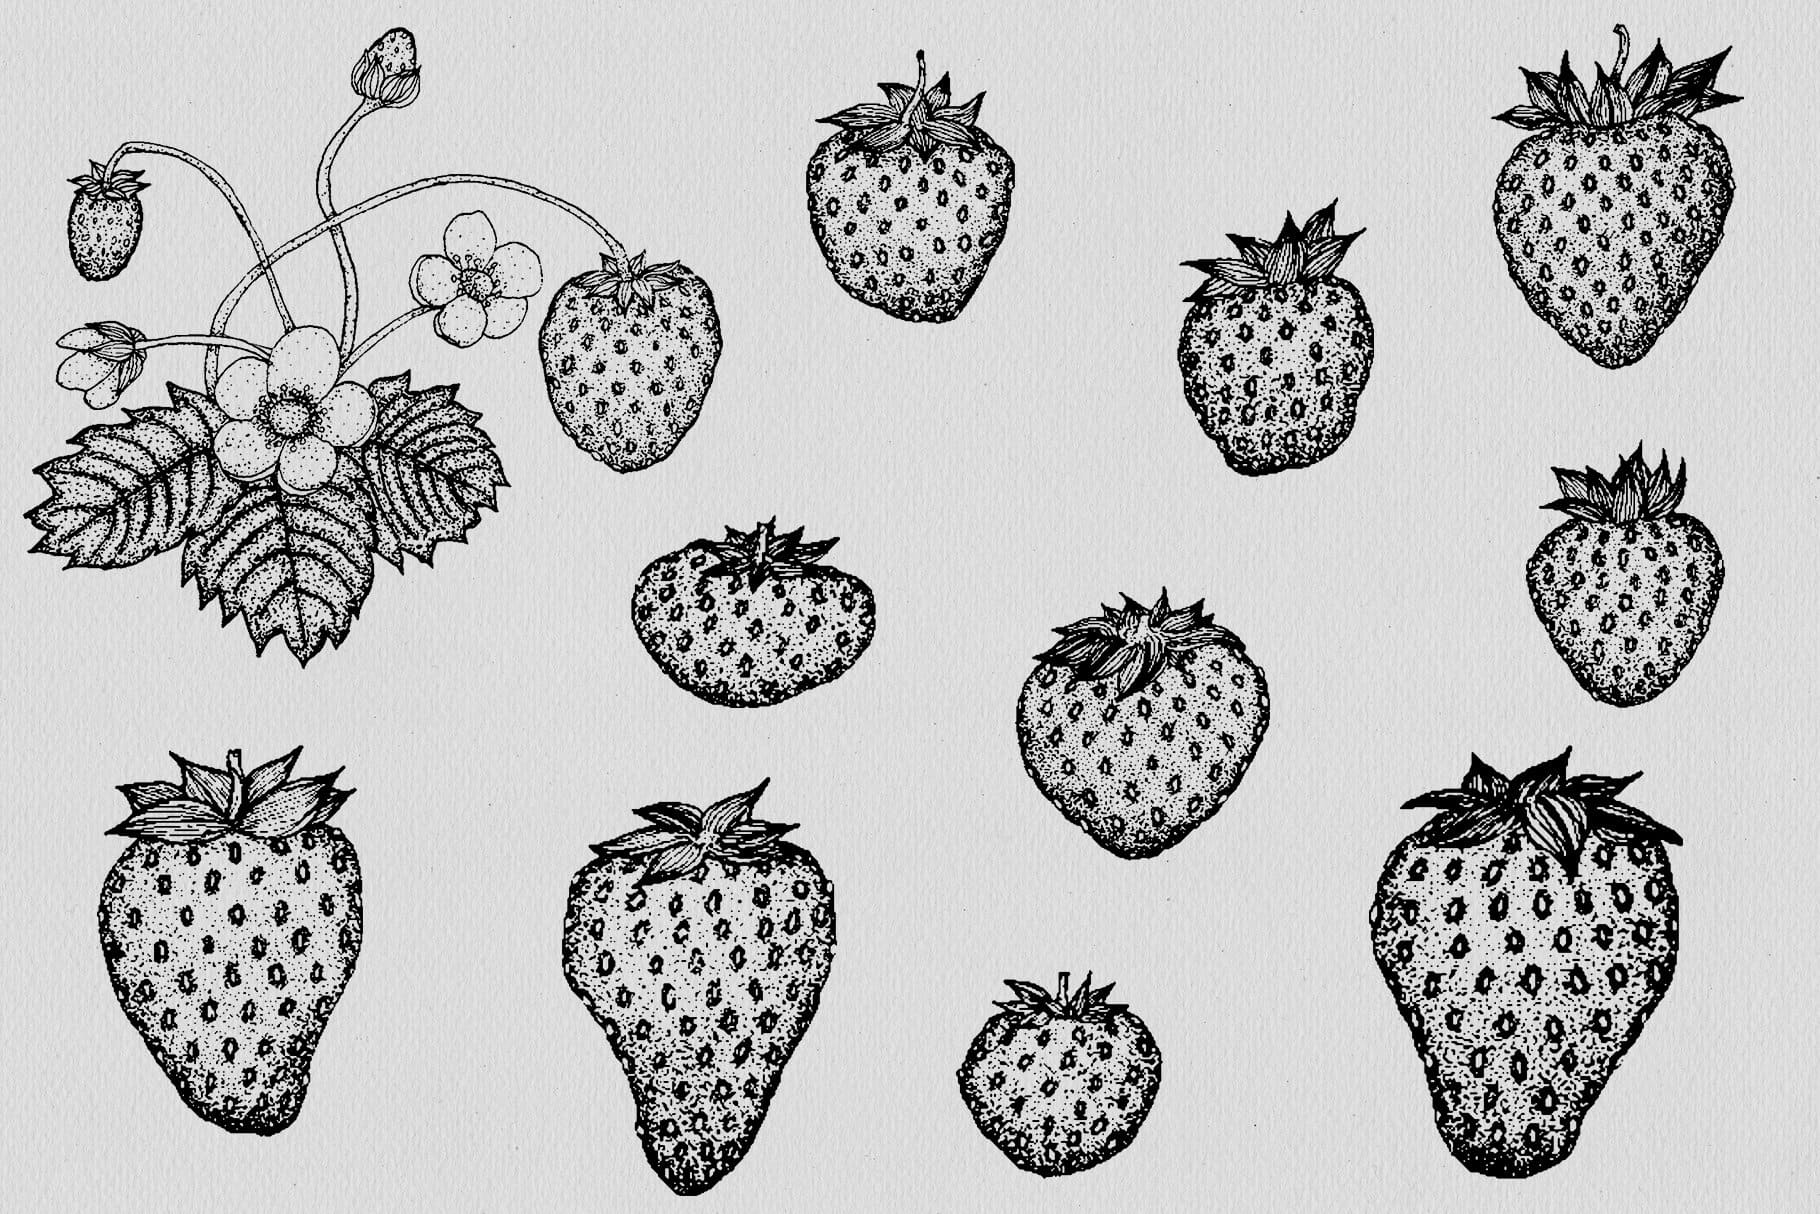 A classic illustration of a strawberry in black and white.